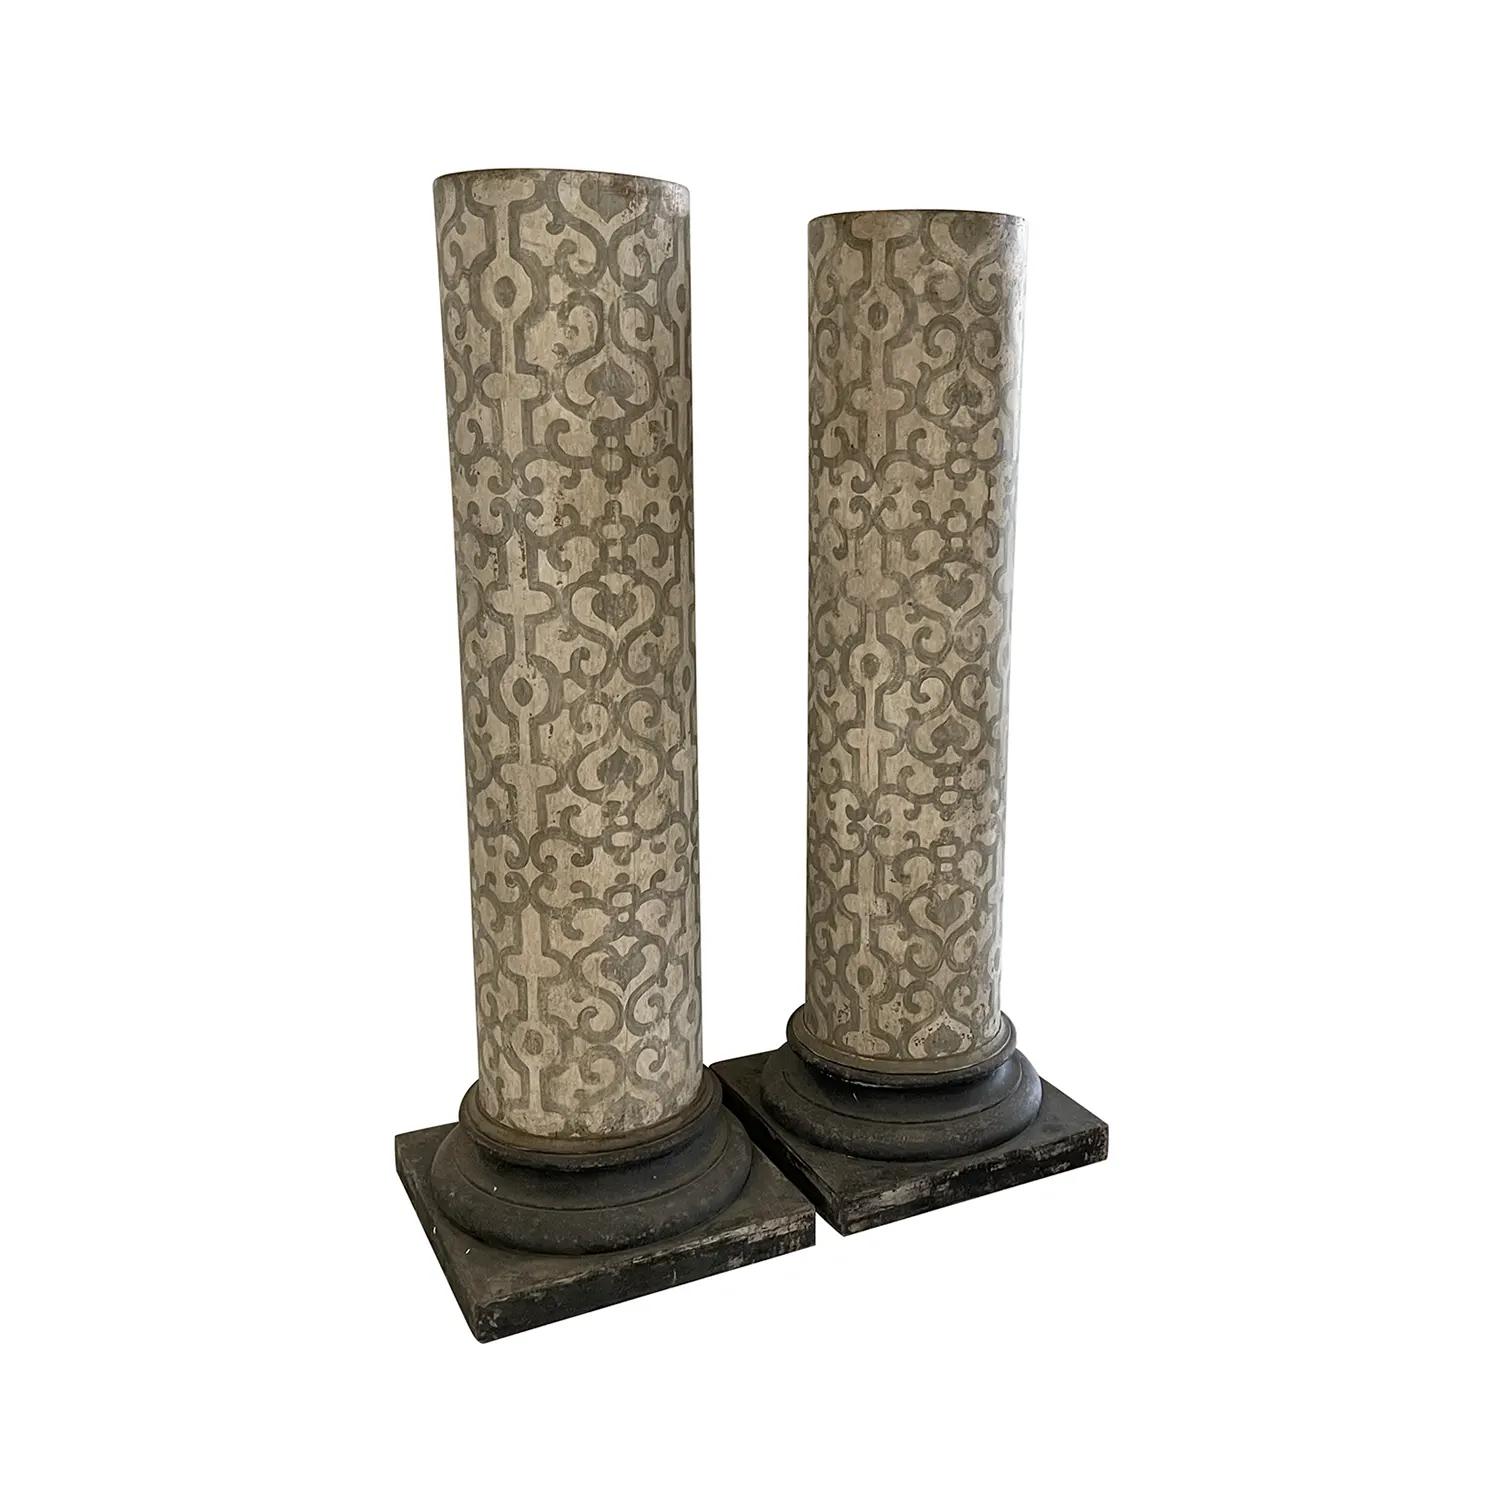 19th Century Italian Pair of Antique Arte Povera Pinewood Column Pedestals In Good Condition For Sale In West Palm Beach, FL